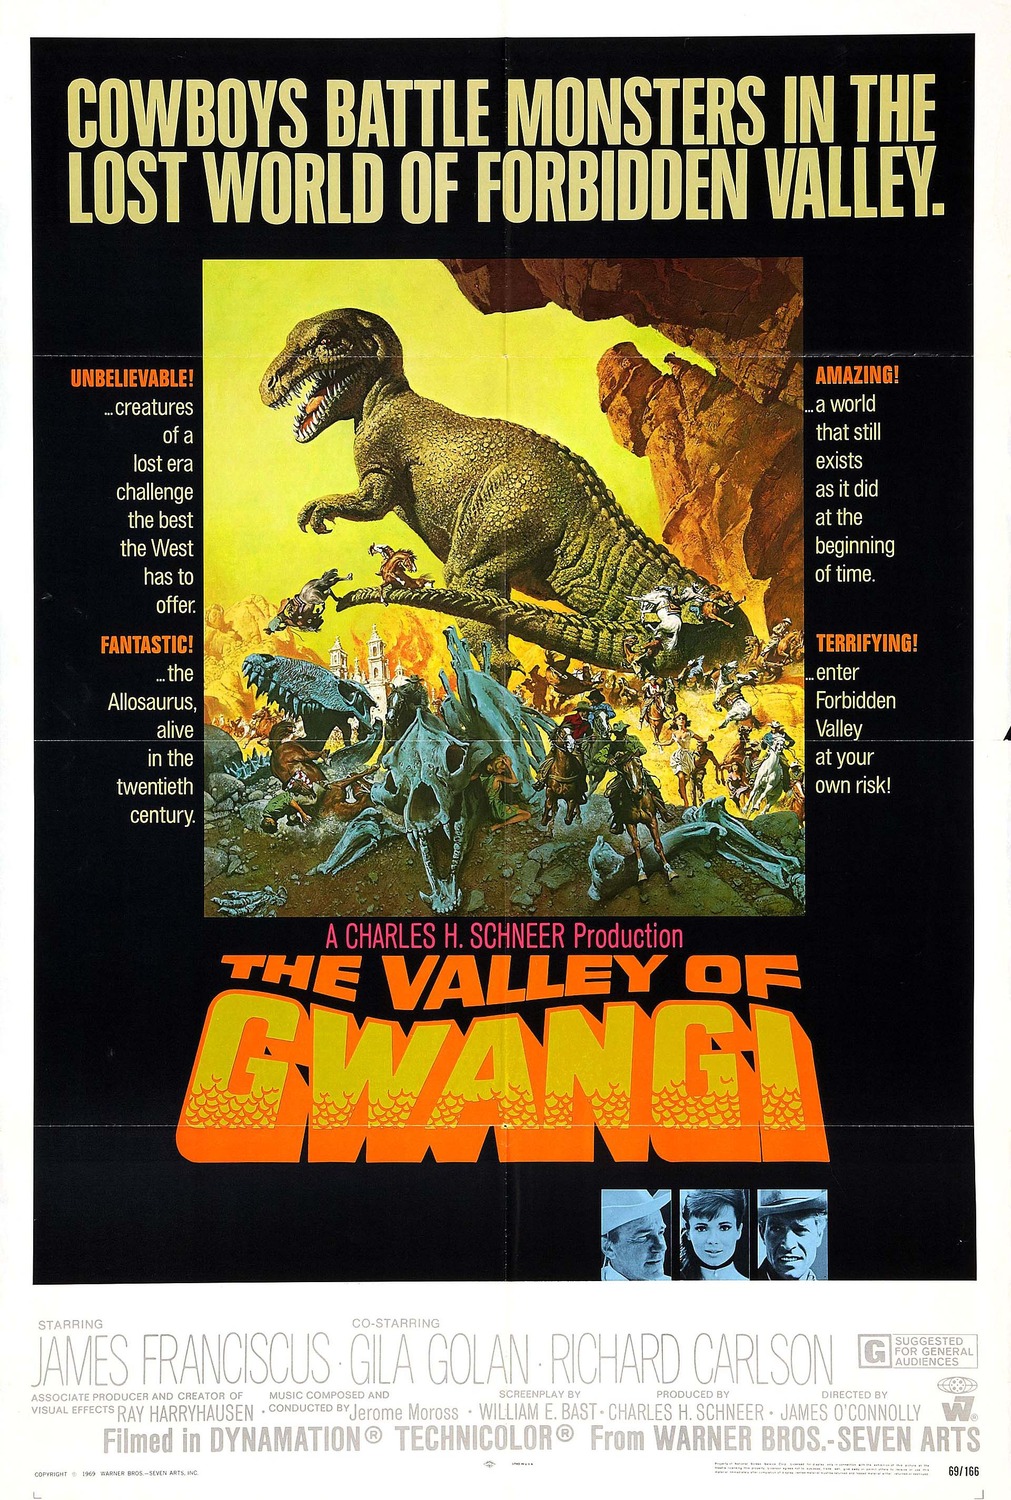 Extra Large Movie Poster Image for The Valley of Gwangi 